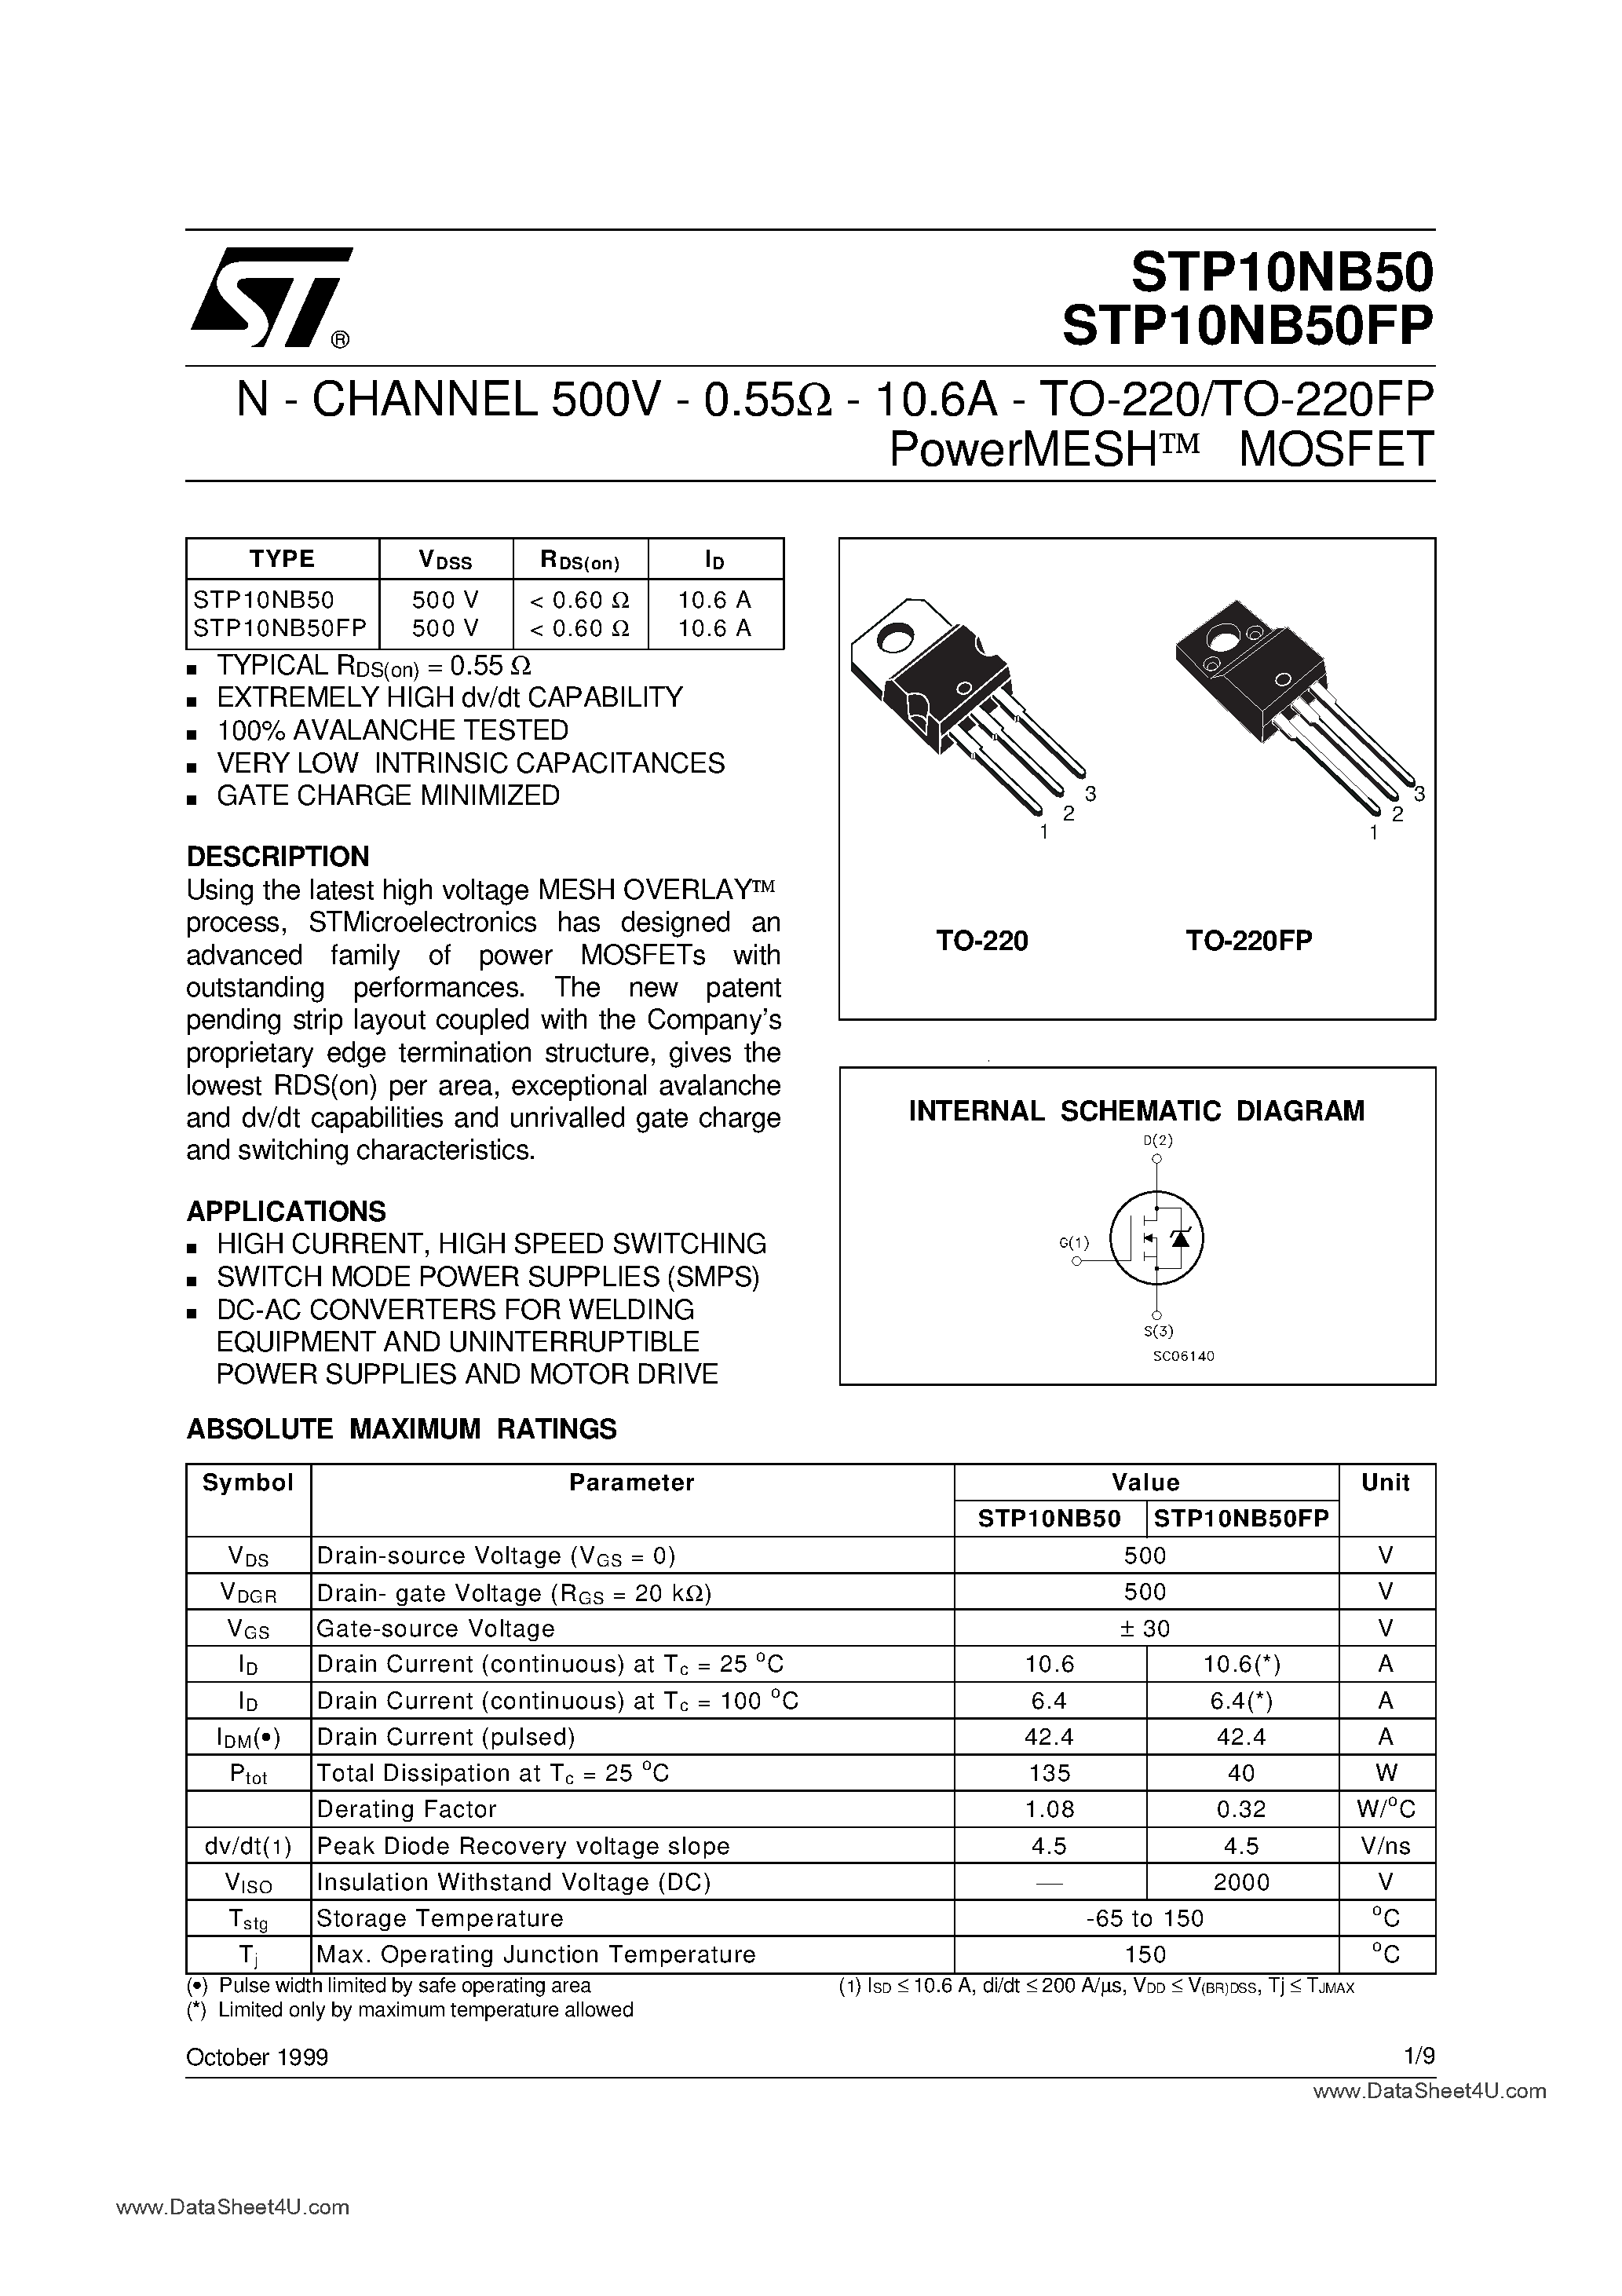 Datasheet STP10NB50 - N-CHANNEL Power MOSFET page 1